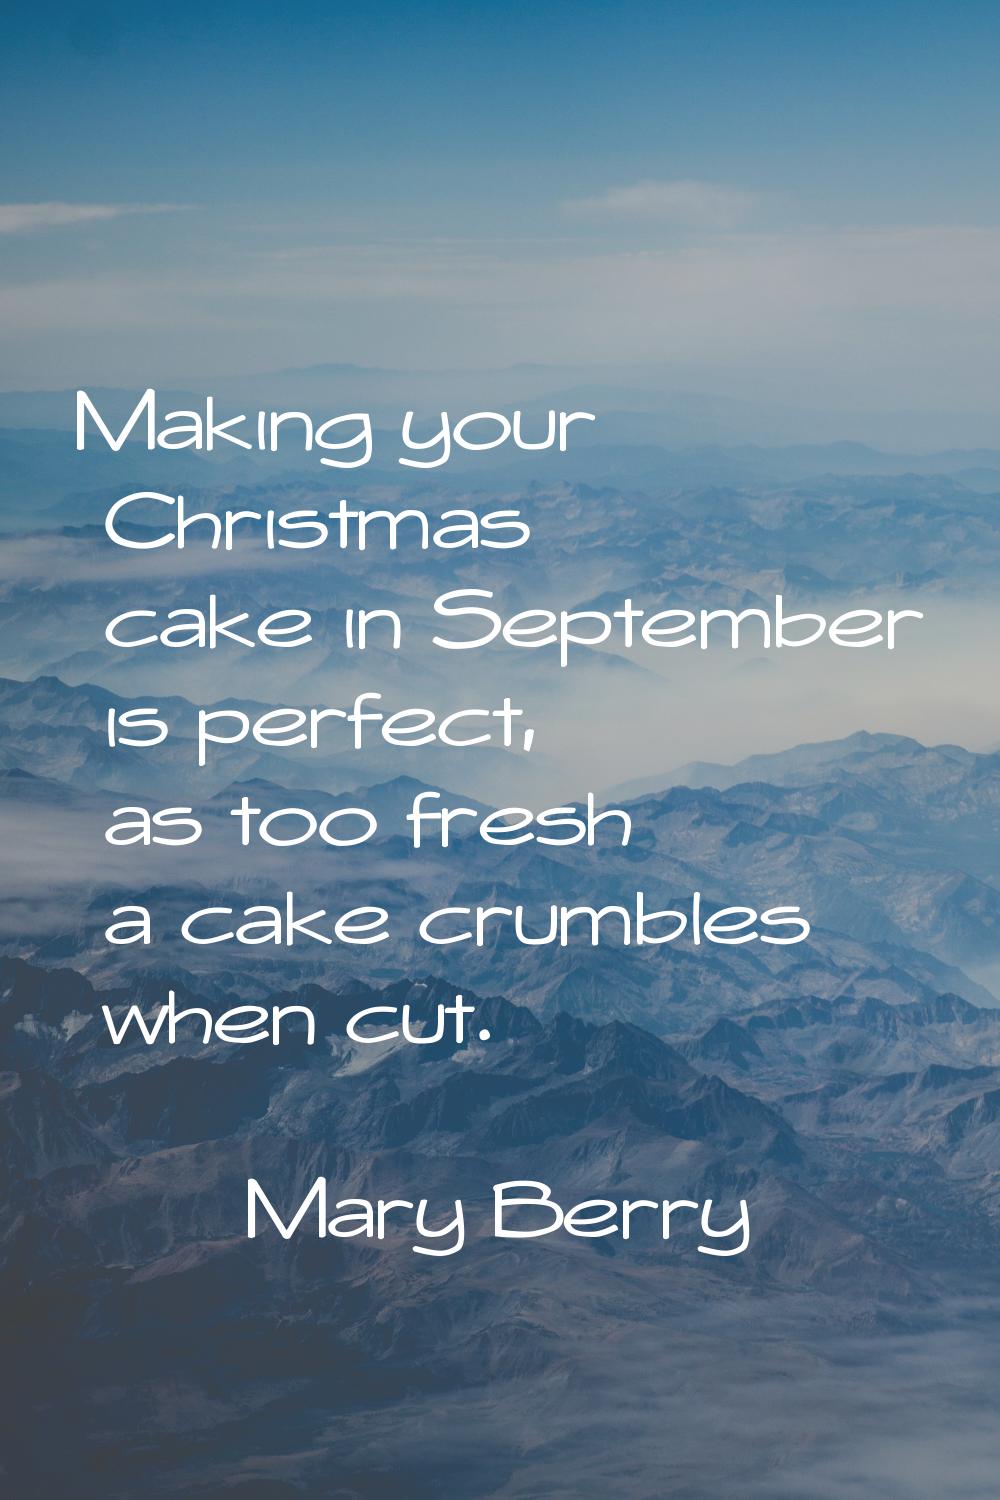 Making your Christmas cake in September is perfect, as too fresh a cake crumbles when cut.